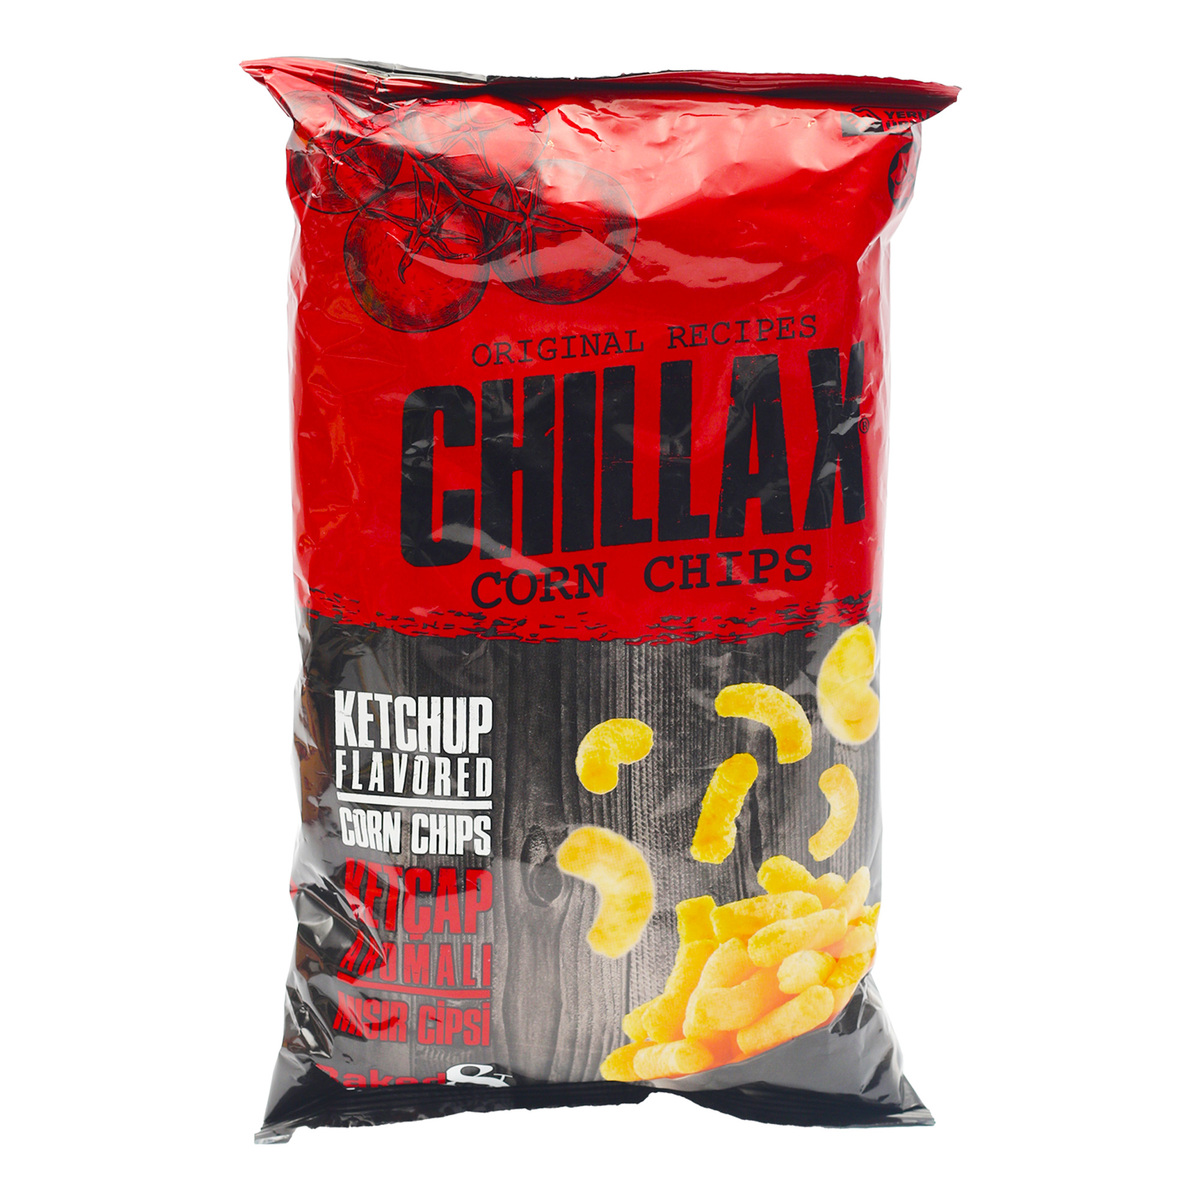 Chillax Ketchup Flavored Corn Chips 60 g